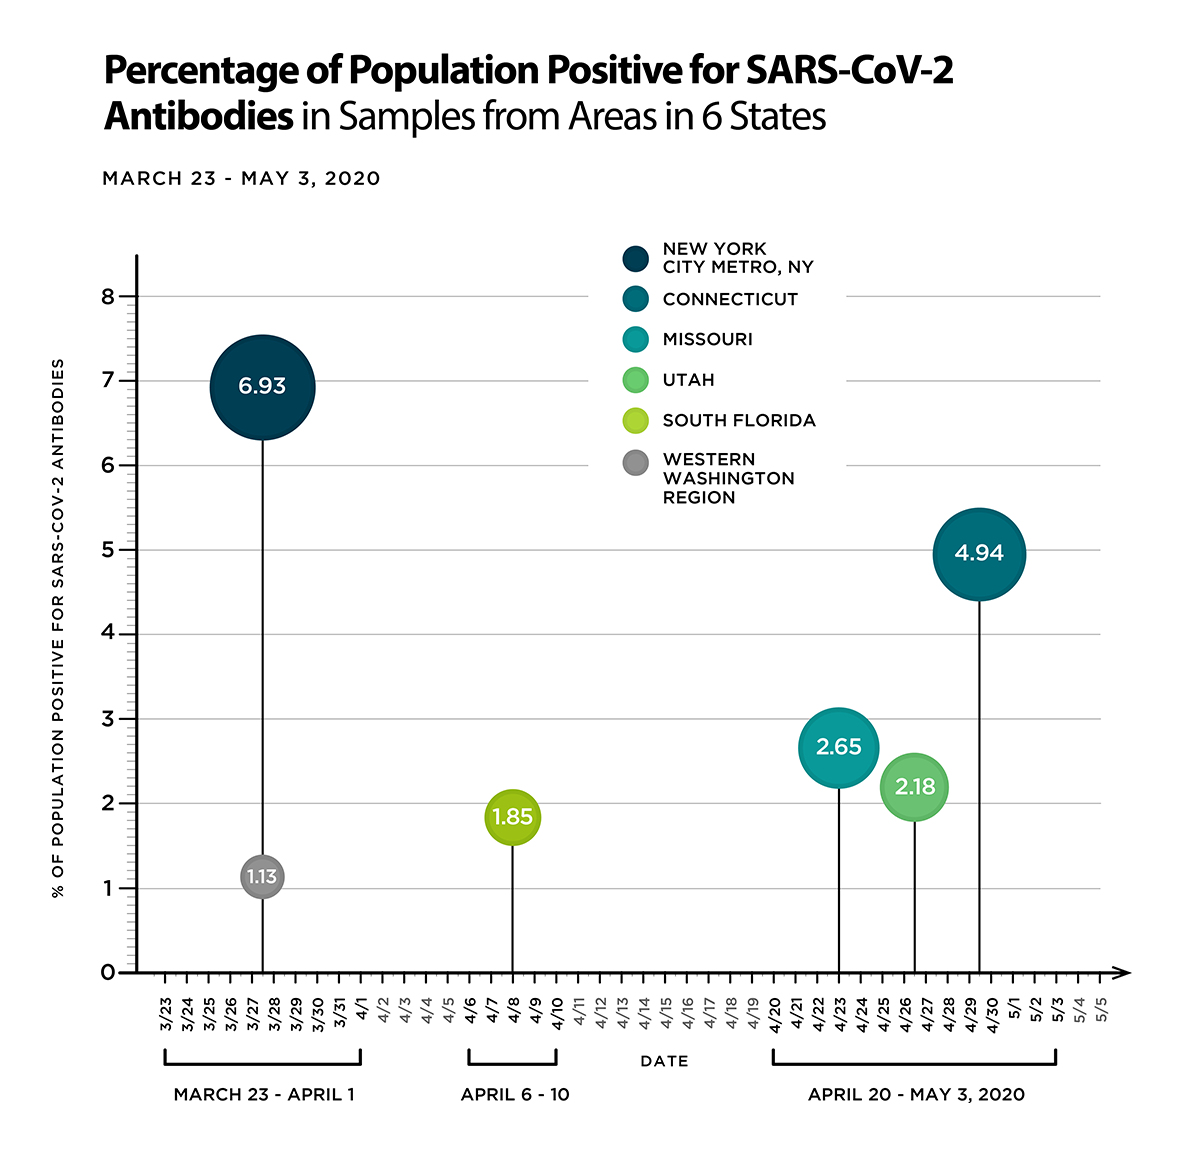 Percentage of Population Positive for SARS-CoV-2 Antibodies in Samples from Areas in 6 States